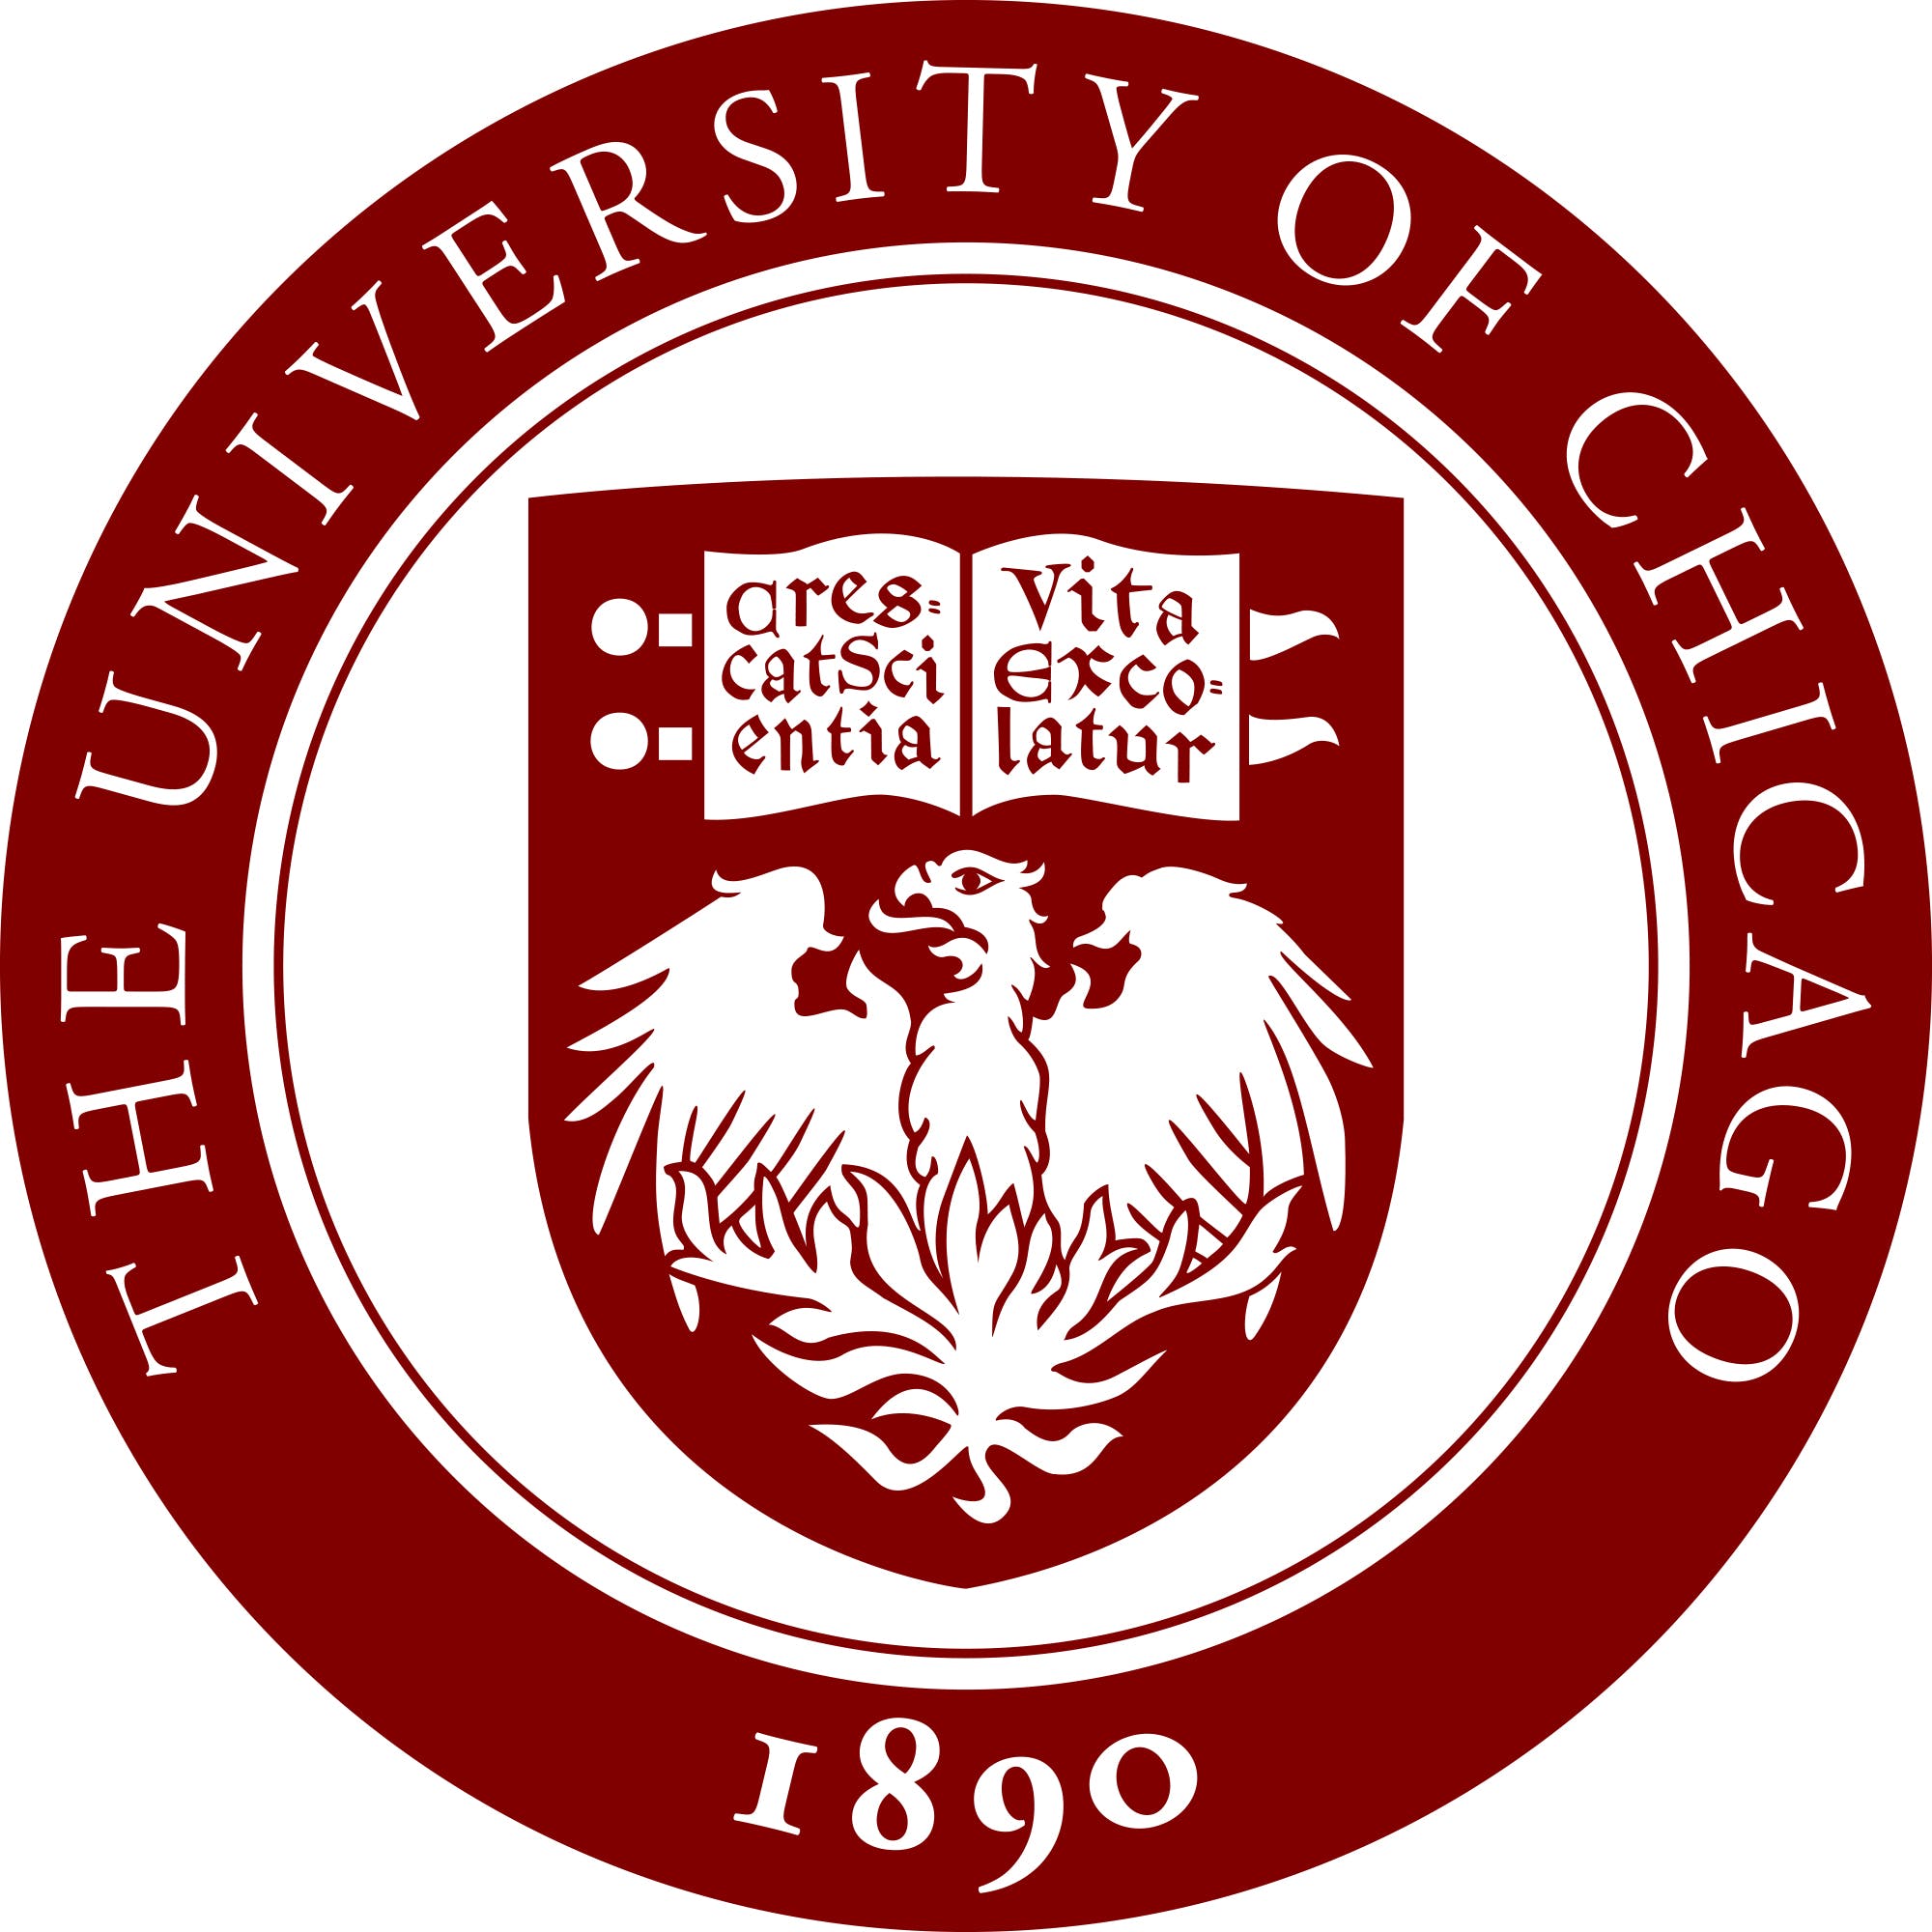 Picture: University of Chicago